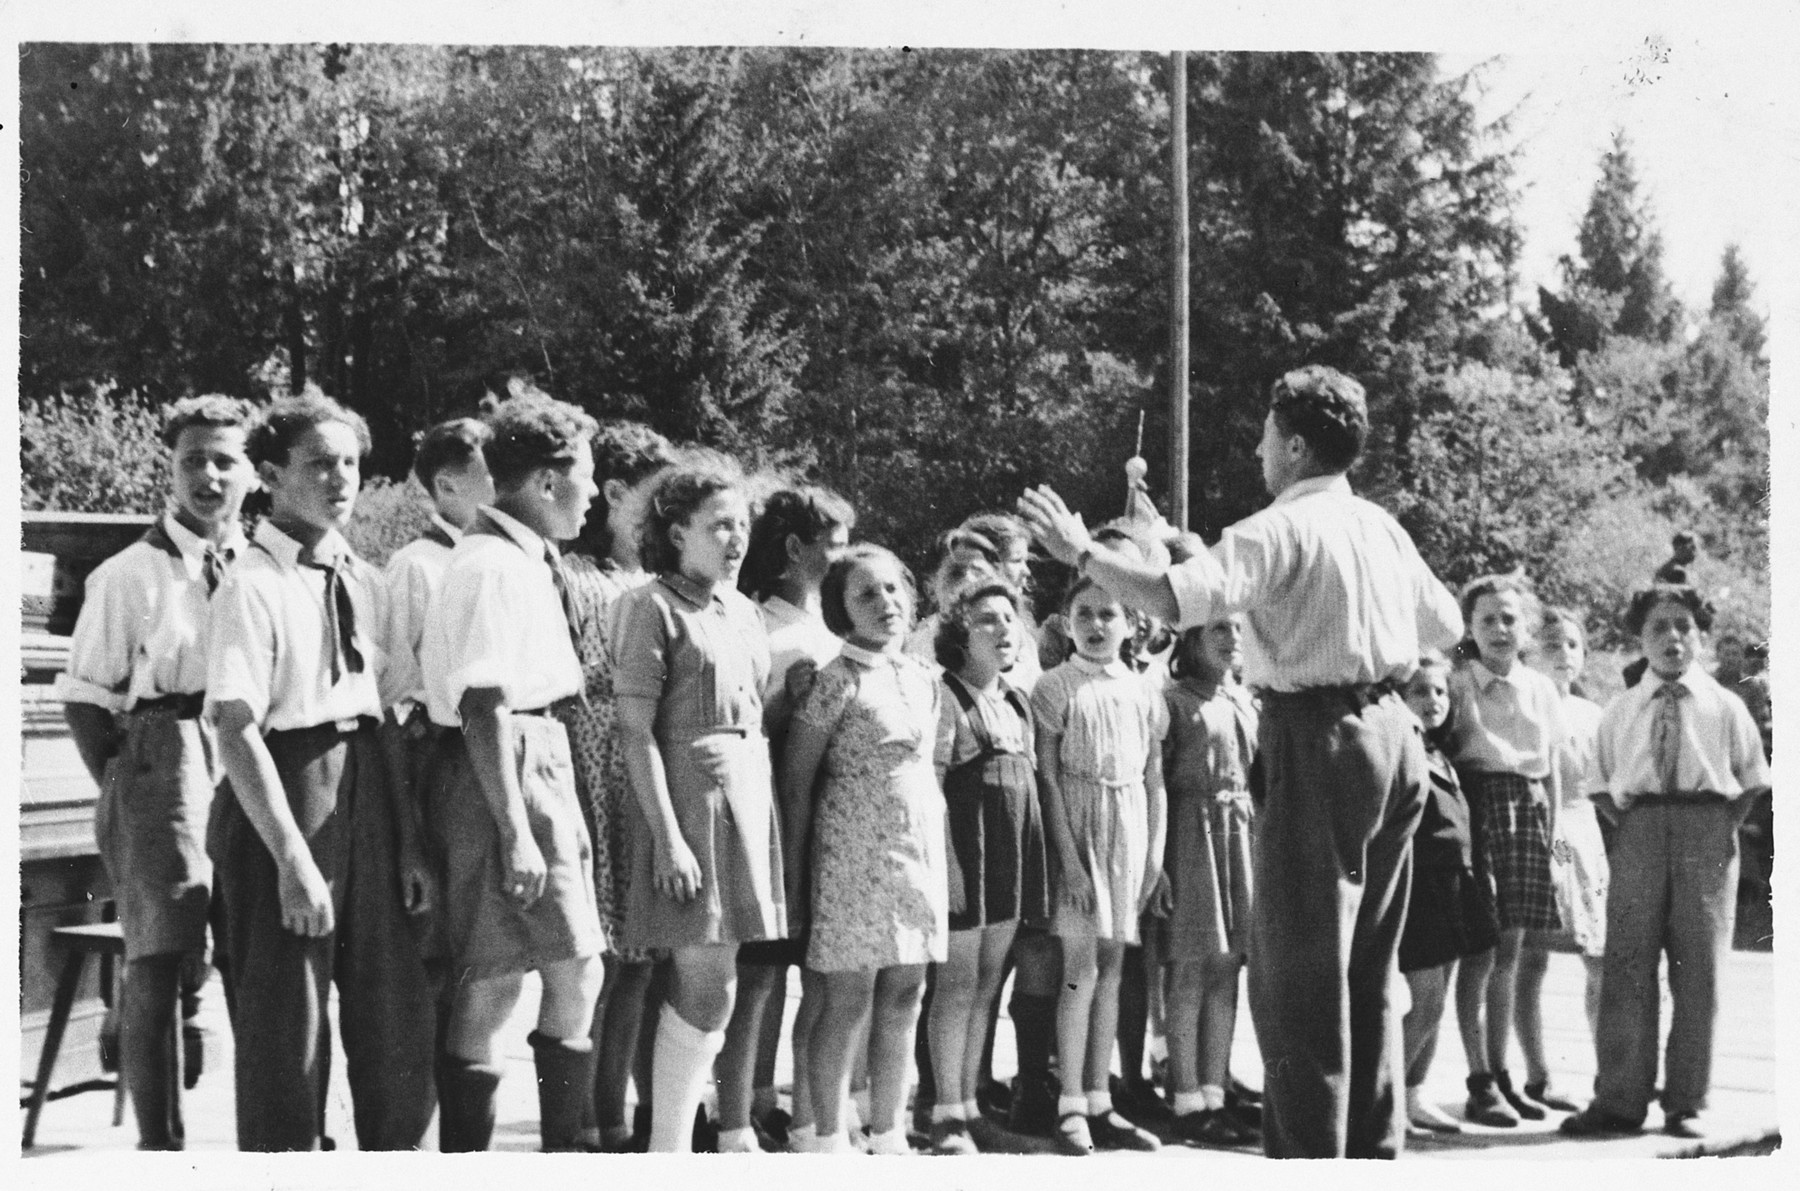 Children sing in a Lag BaOmer celebration at the Foehrenwald displaced persons camp.

Leading the singing is Stanley (Shlomo) Zektzer.